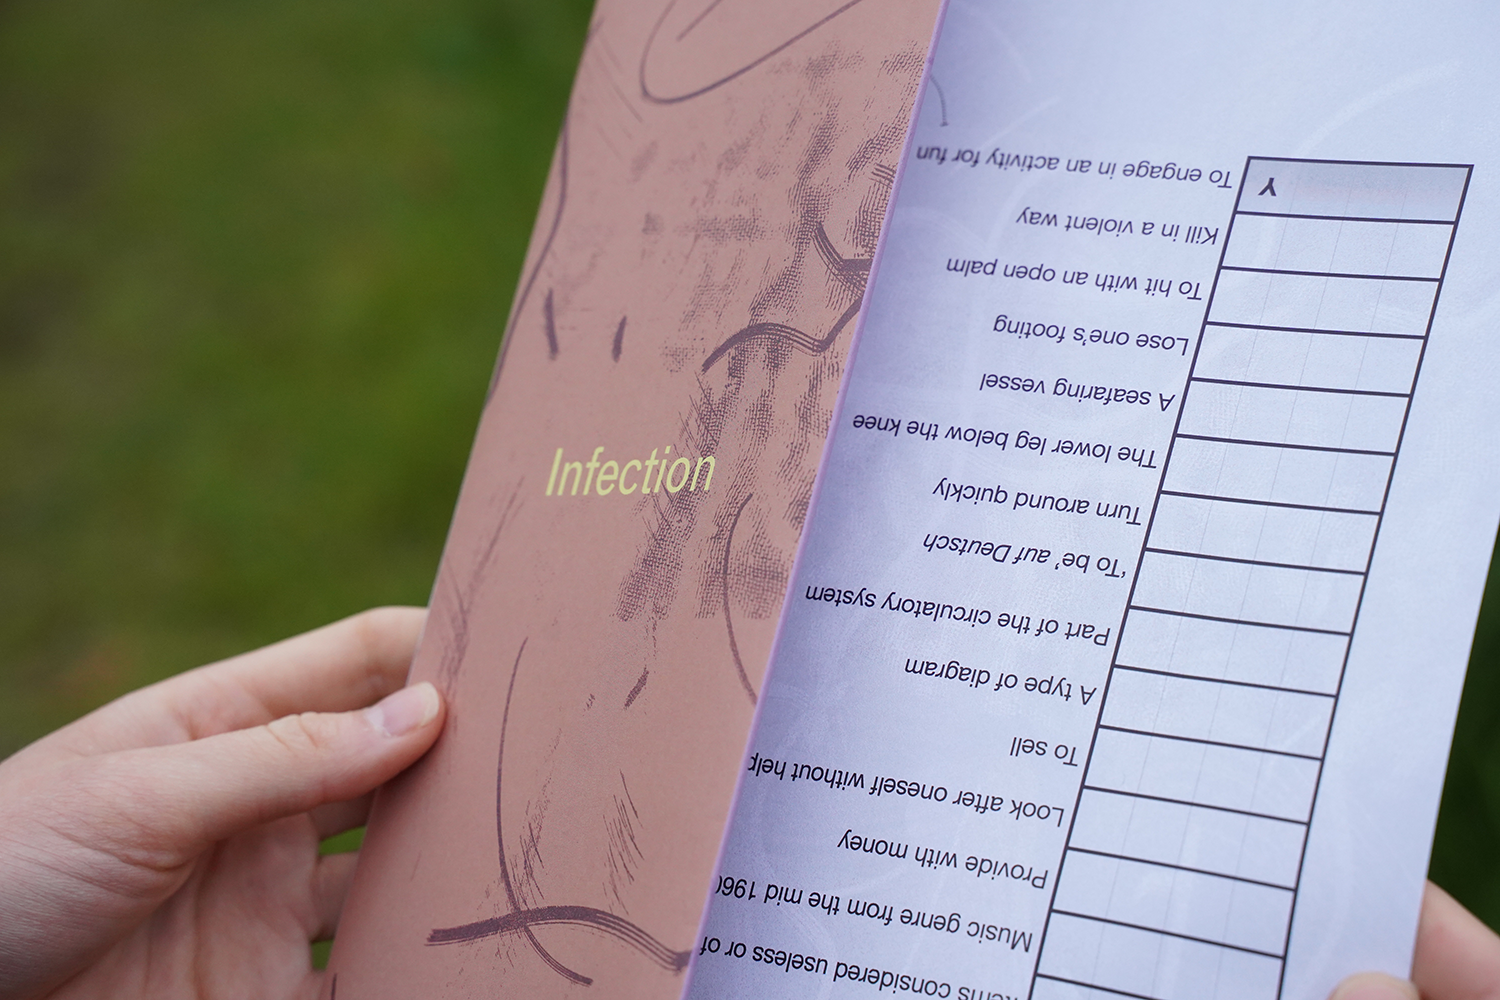 Hands holding a copy of the Infection publication. The background is a meadow.